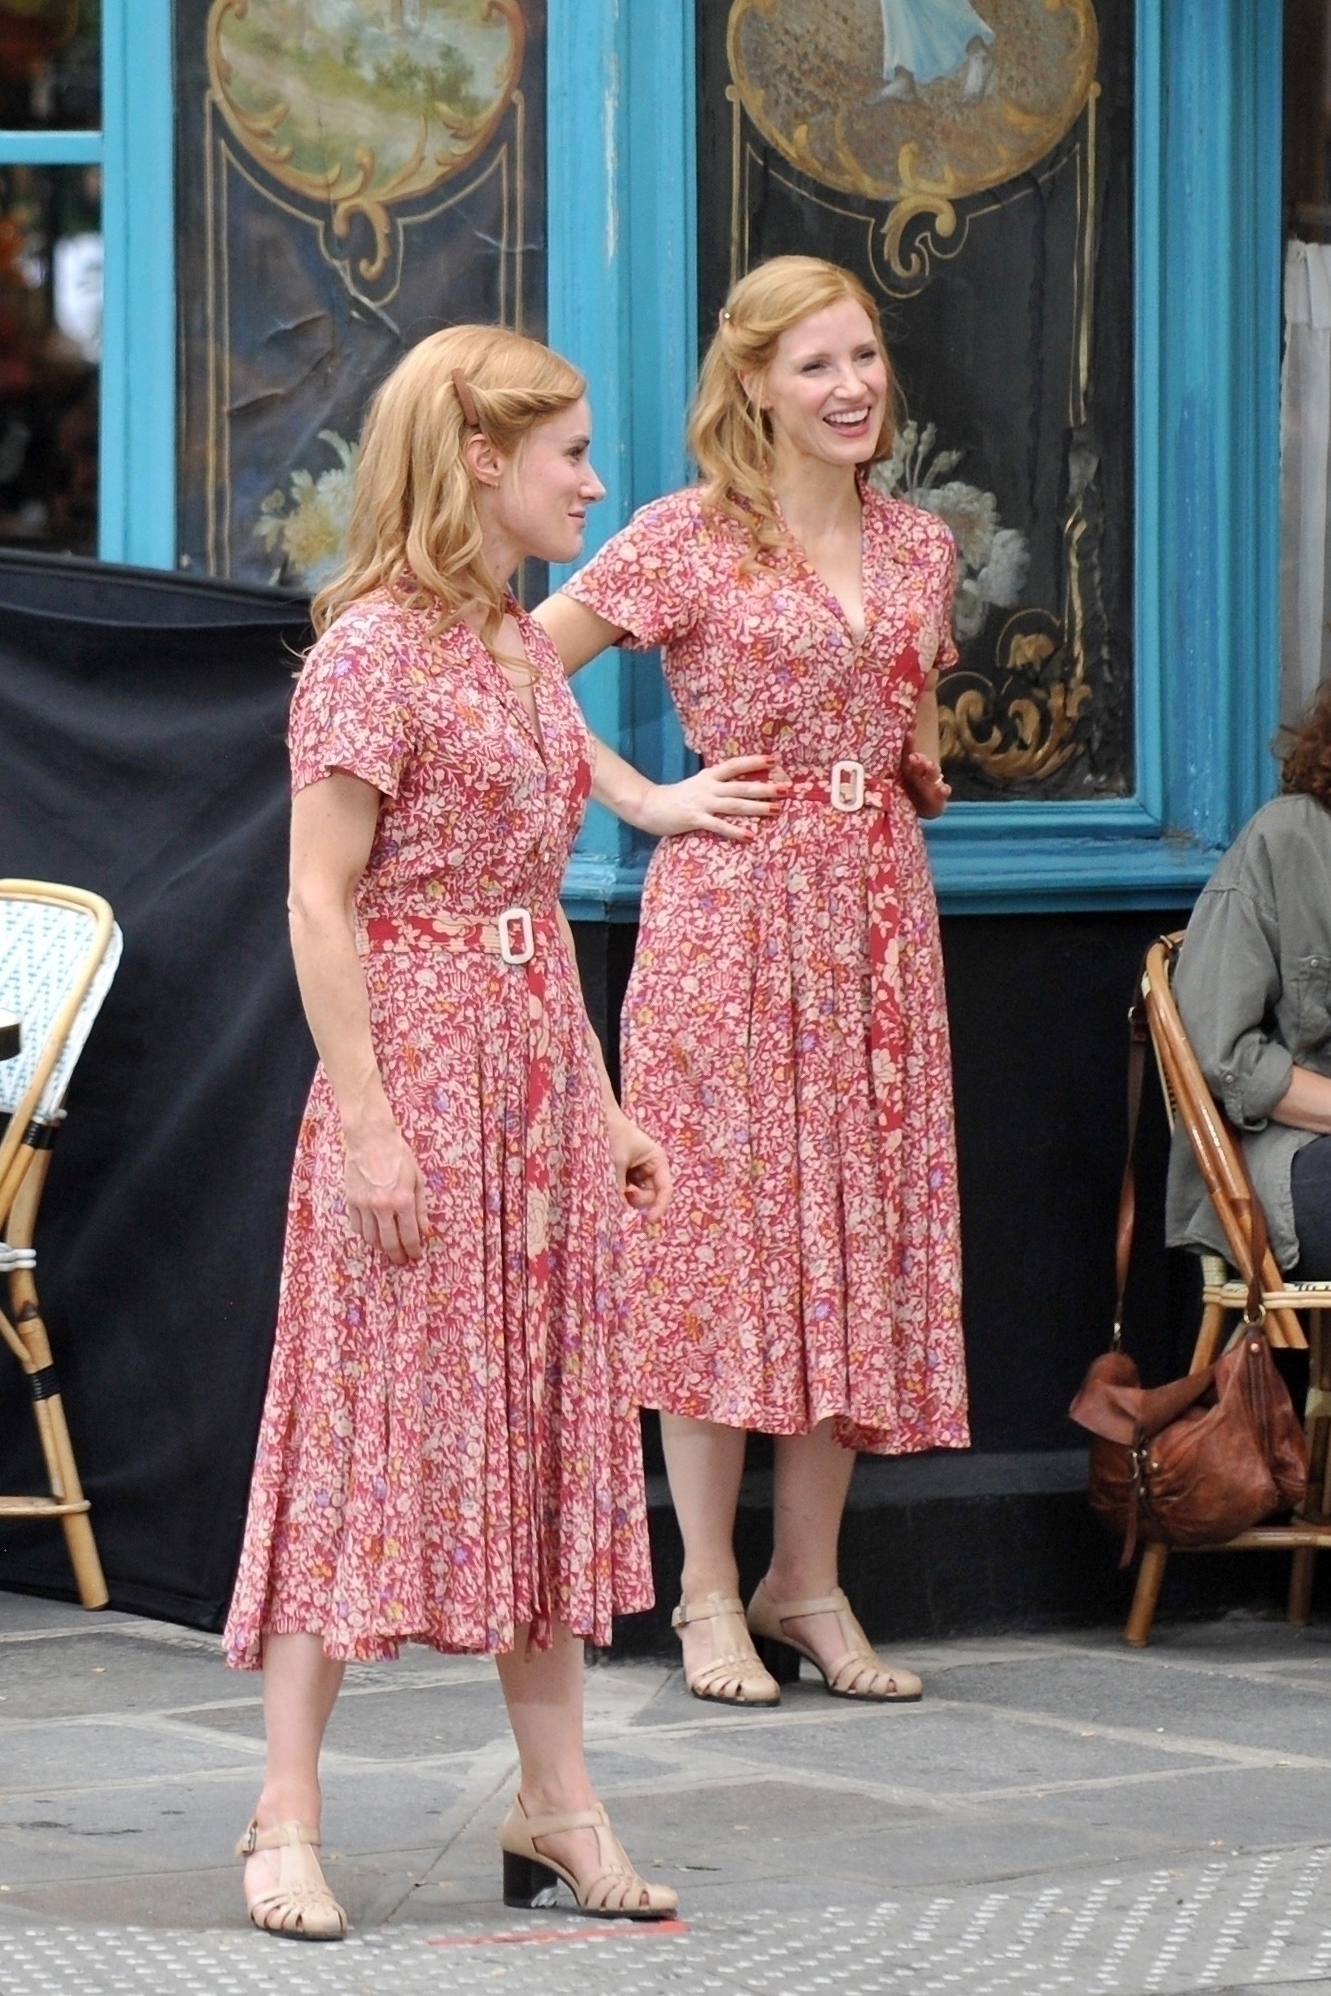 Jessica Chastain and her stunt double on set